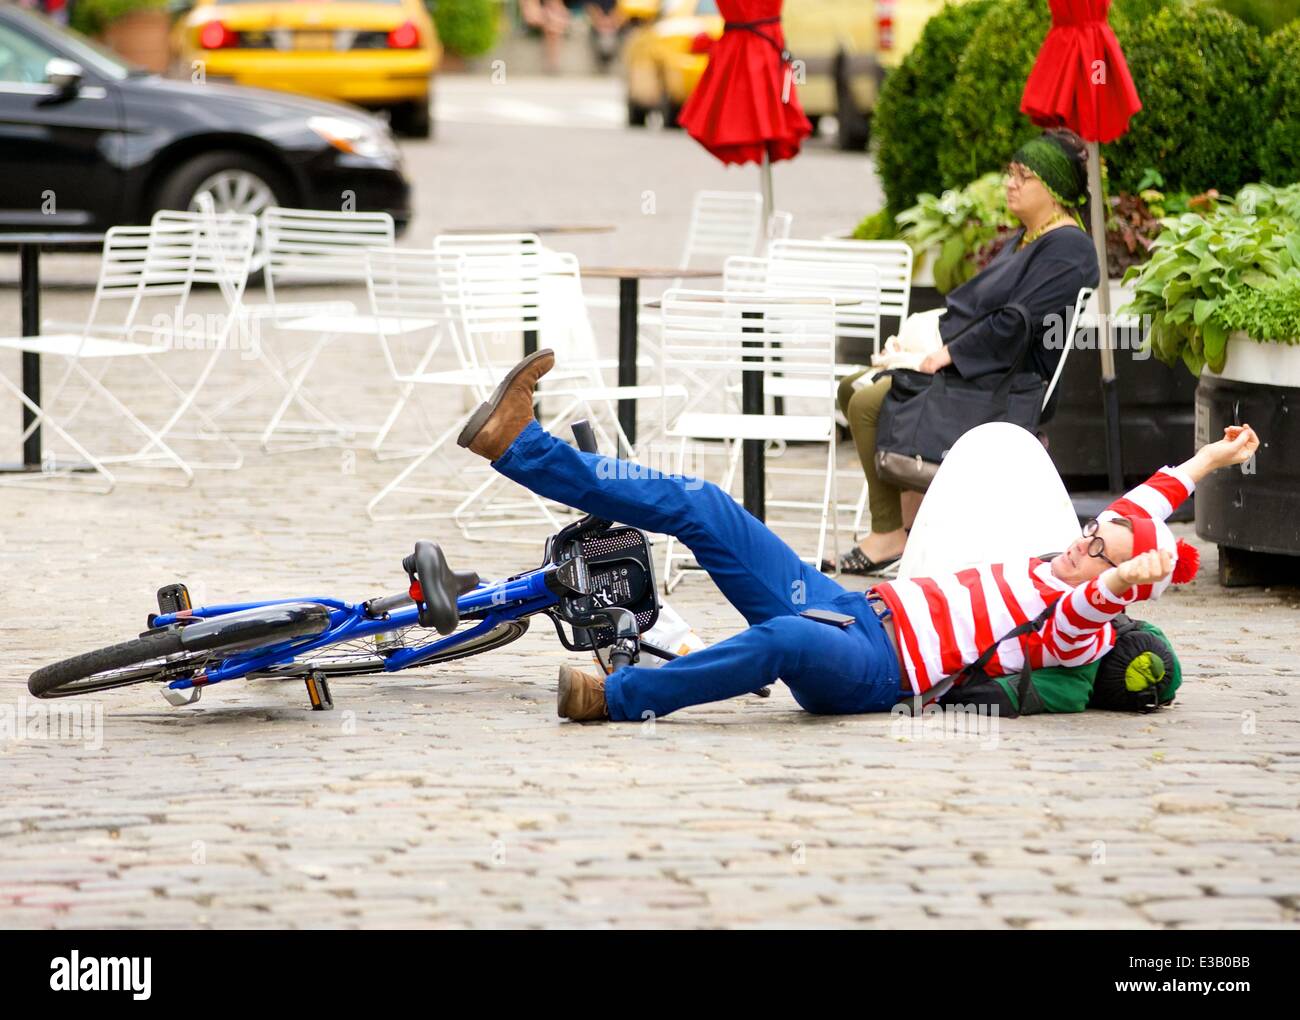 A man dressed as the character Waldo from the children's book series, 'Where's Waldo?' is spotted riding a Citi Bike in the Meatpacking District. With his hands full, Waldo eventually falls off his bicycle to the ground  Featuring: Waldo,Wally Where: New York City, NY, United States When: 14 Sep 2013 Stock Photo